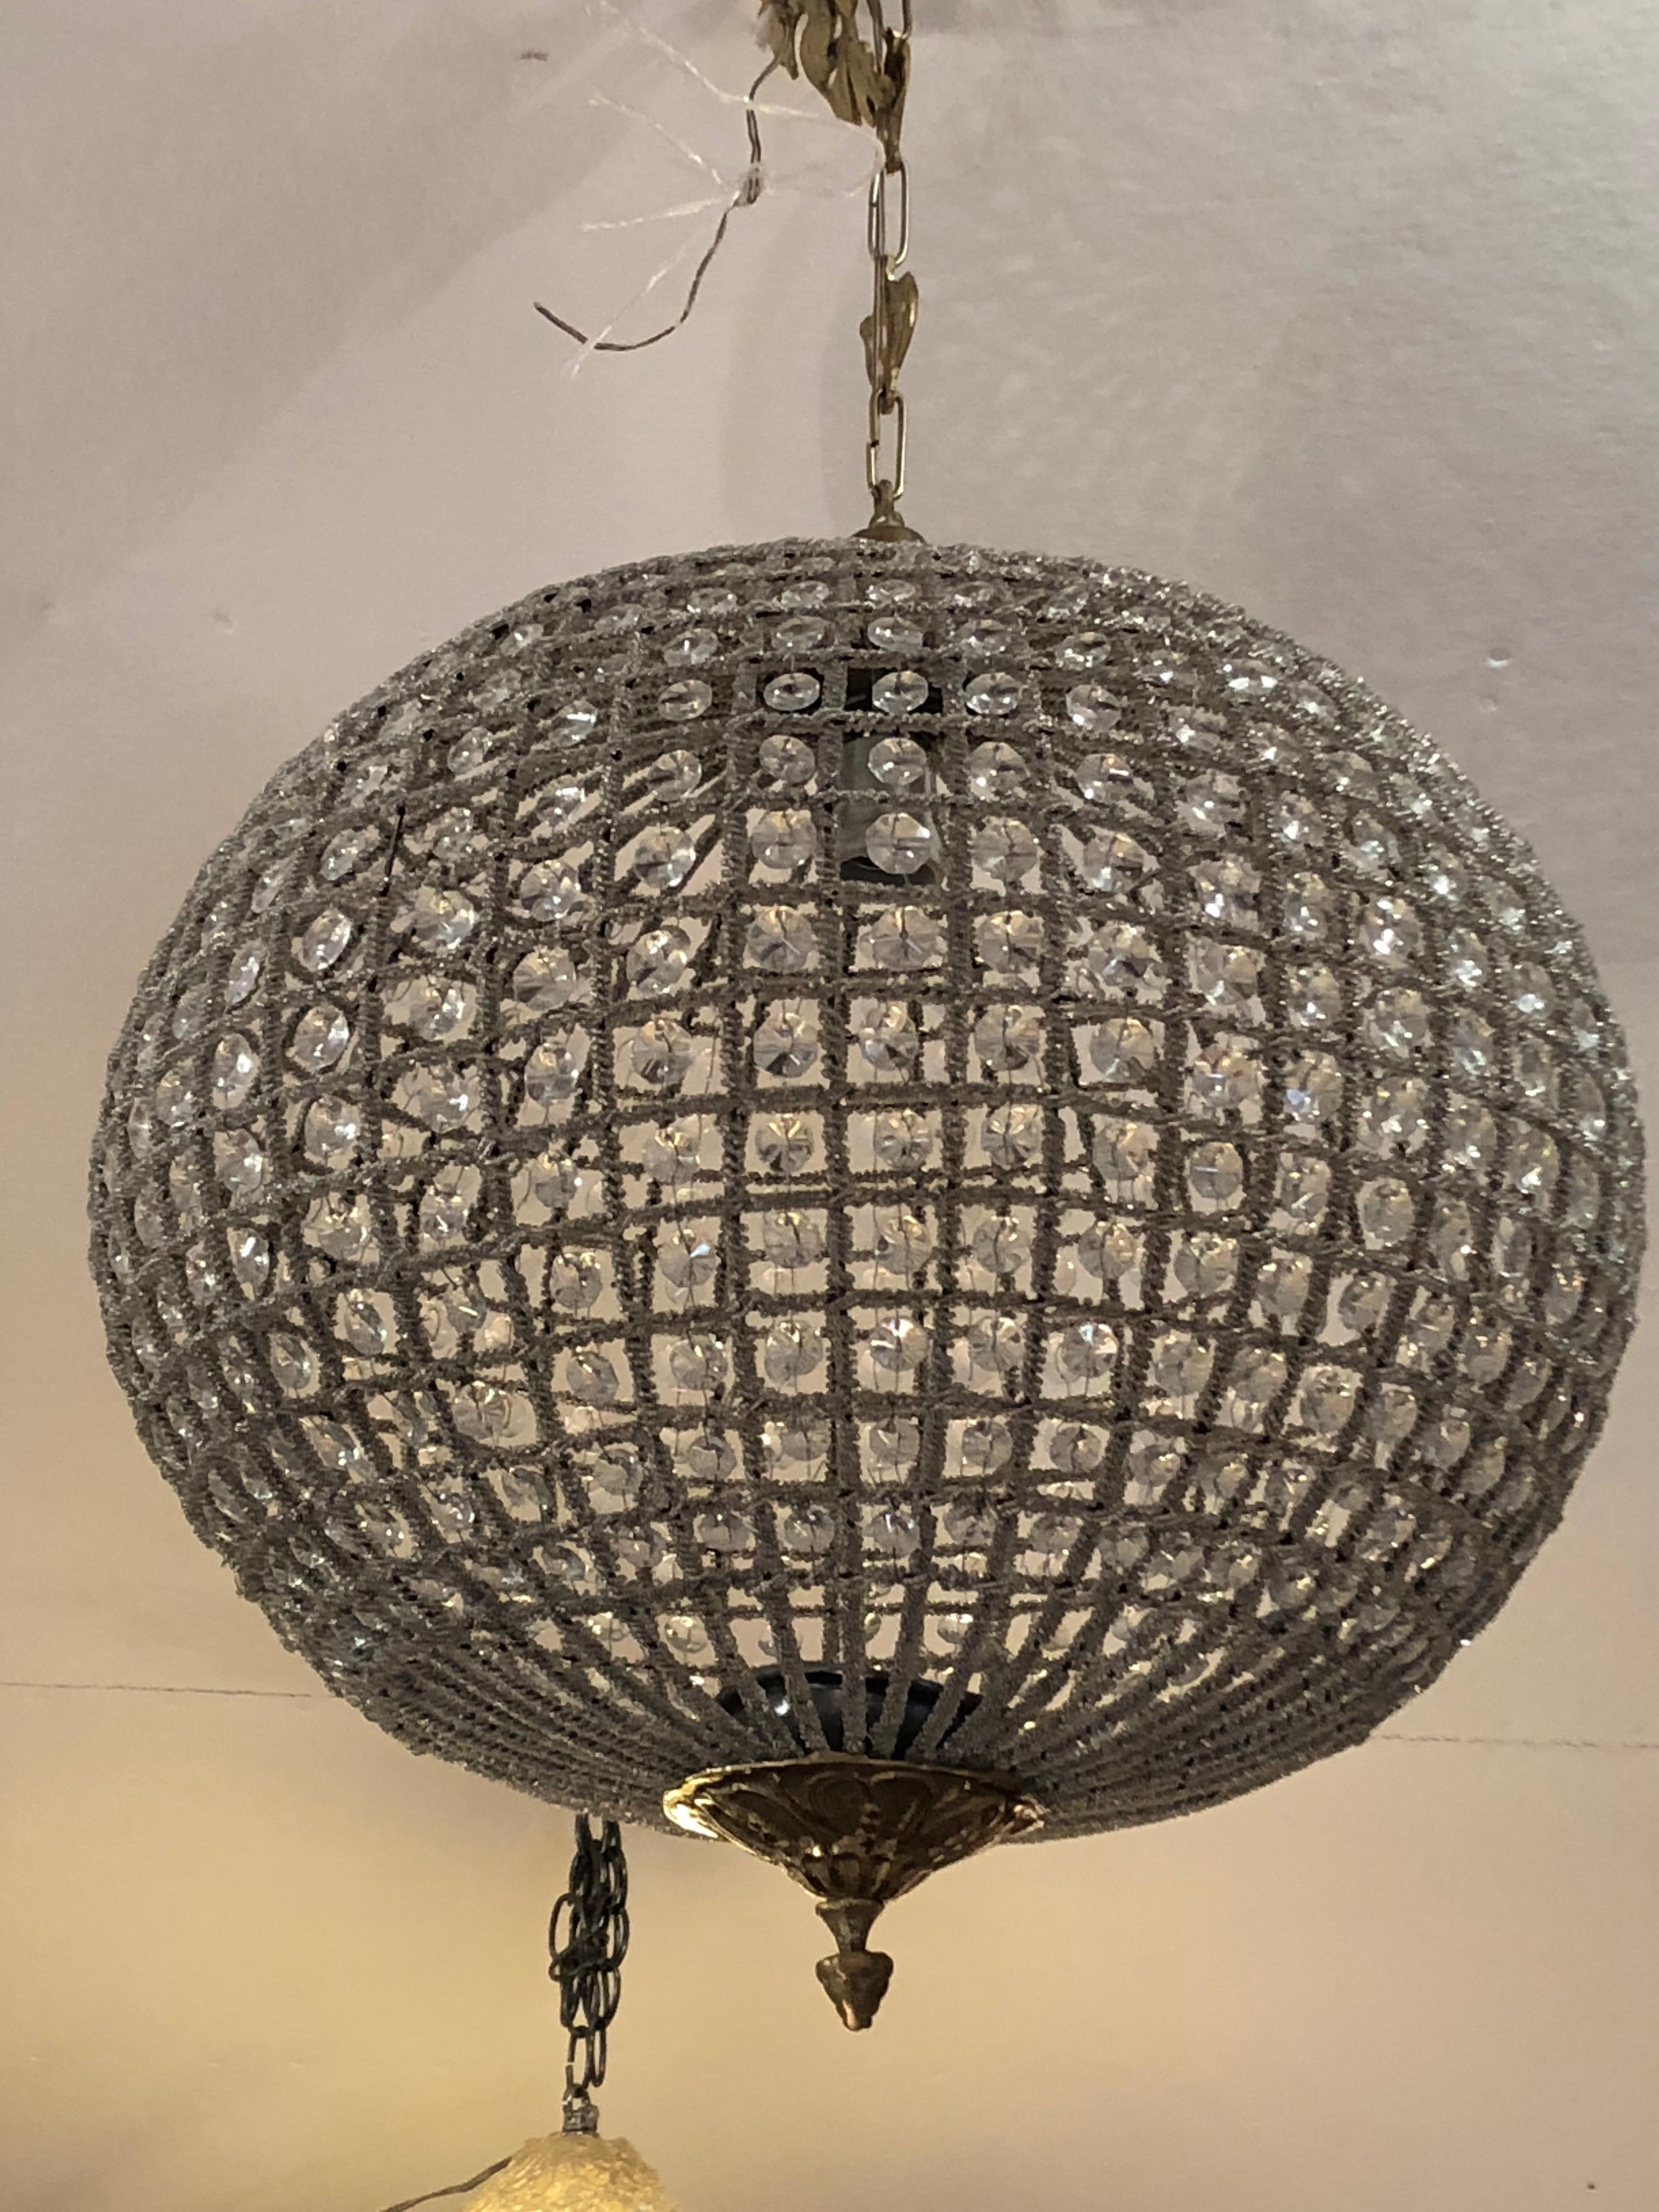 Contemporary Ritzy Beaded and Crystal Large Spherical Chandelier Pendant